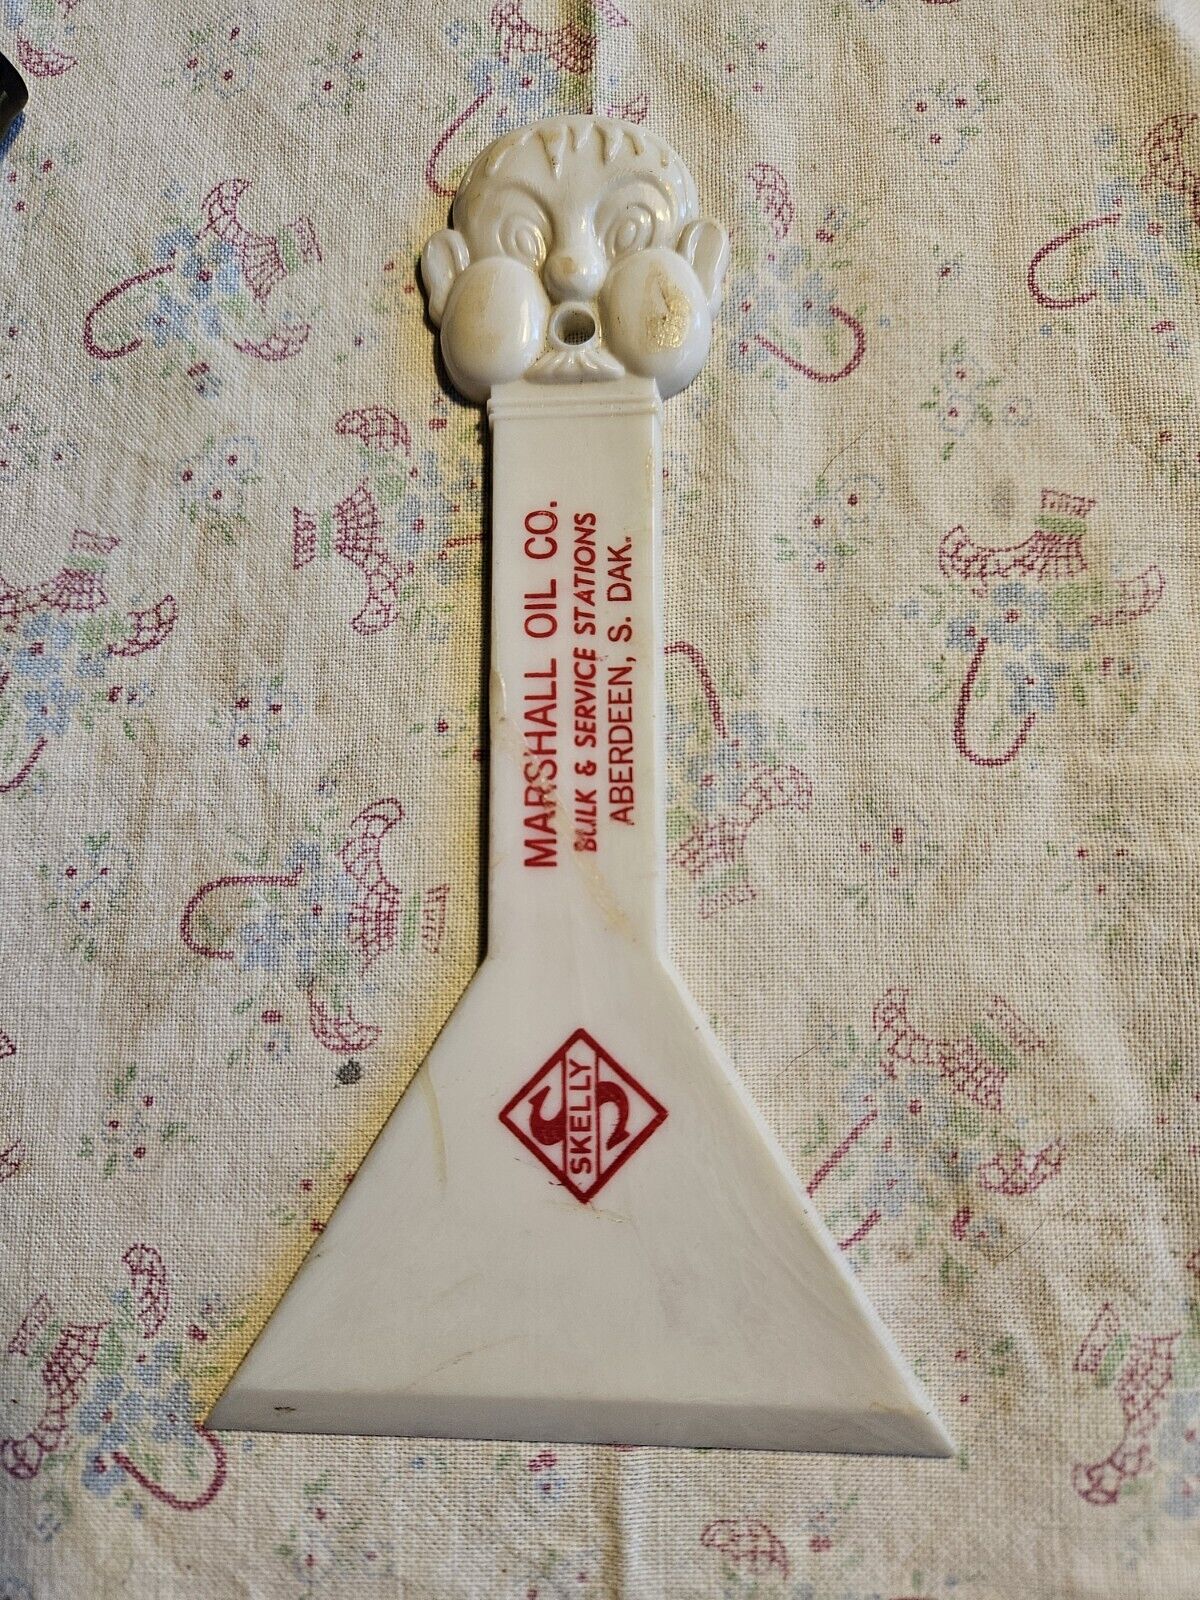 Vintage Marshall Oil Company  Skelly  Promotional Ice Scraper USA Made